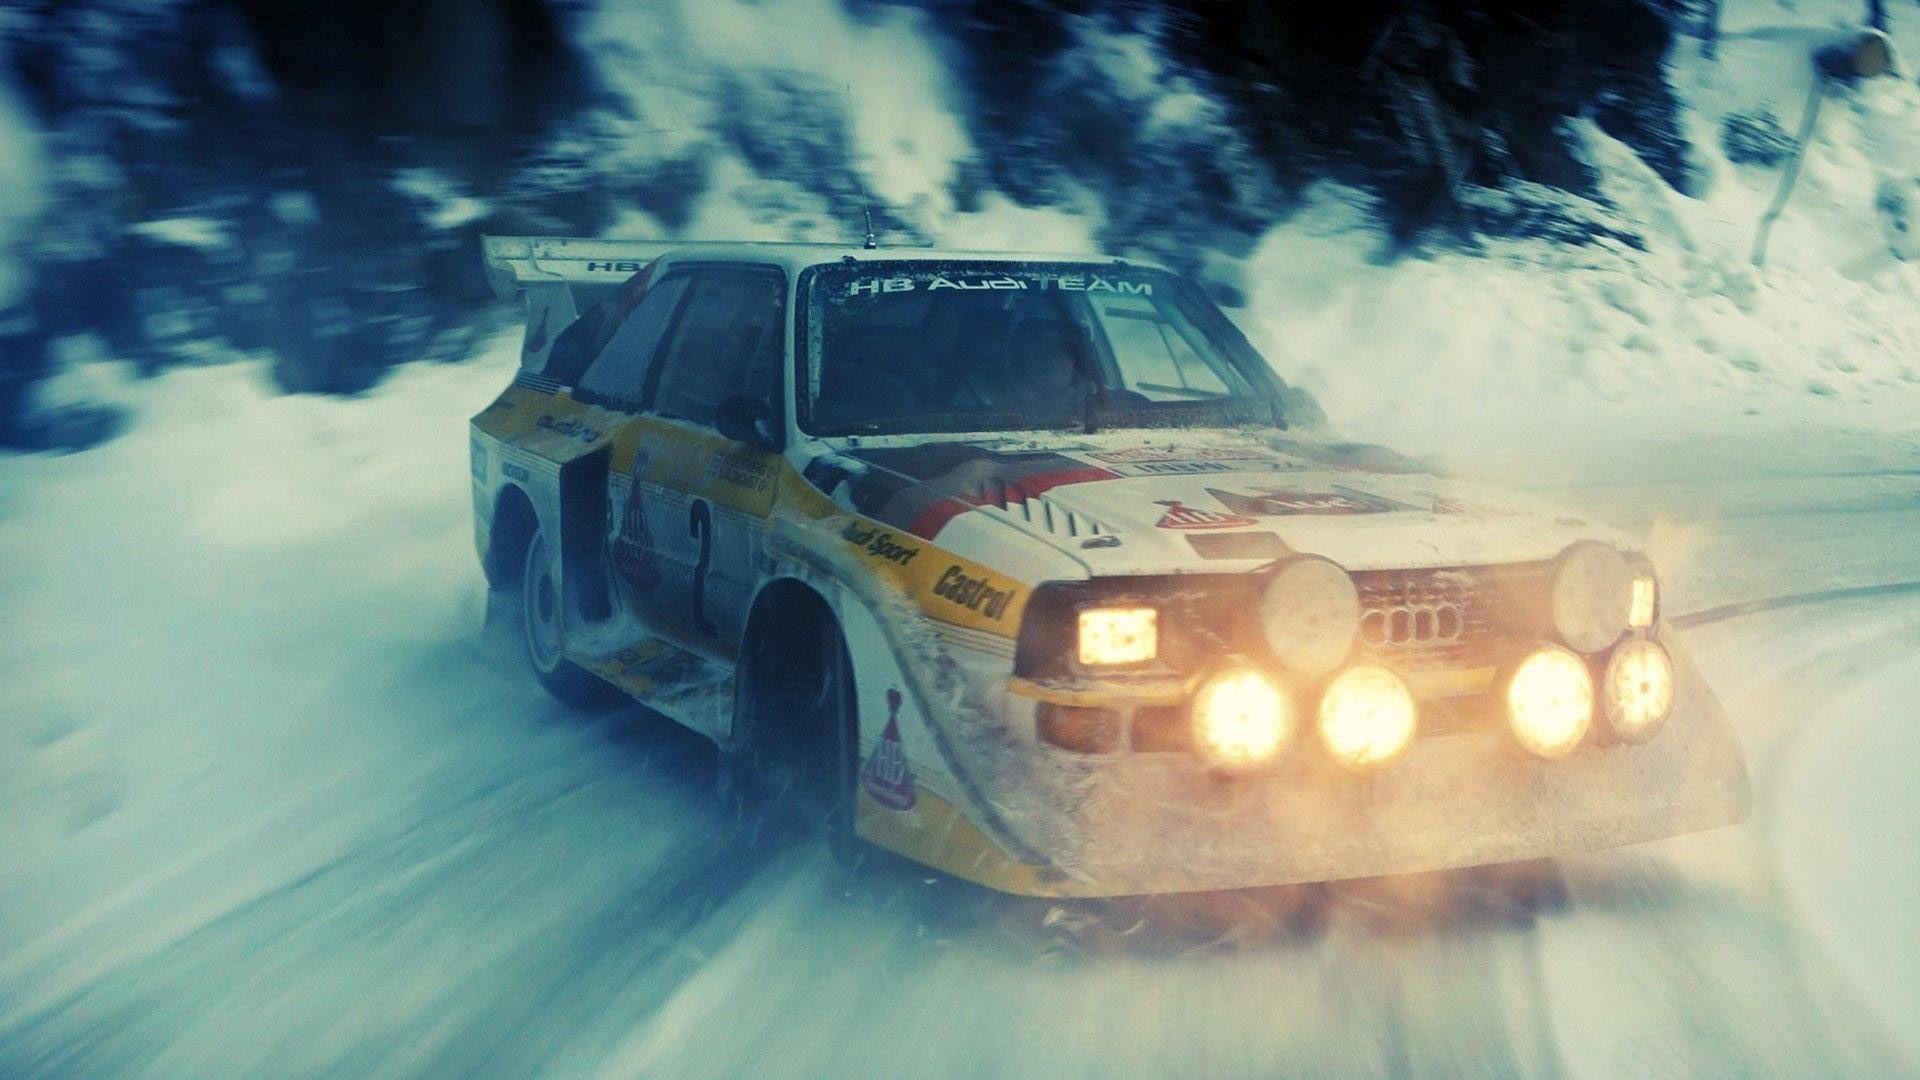 Do you like snow and Group B? Here, take this wallpaper (1920x1080)